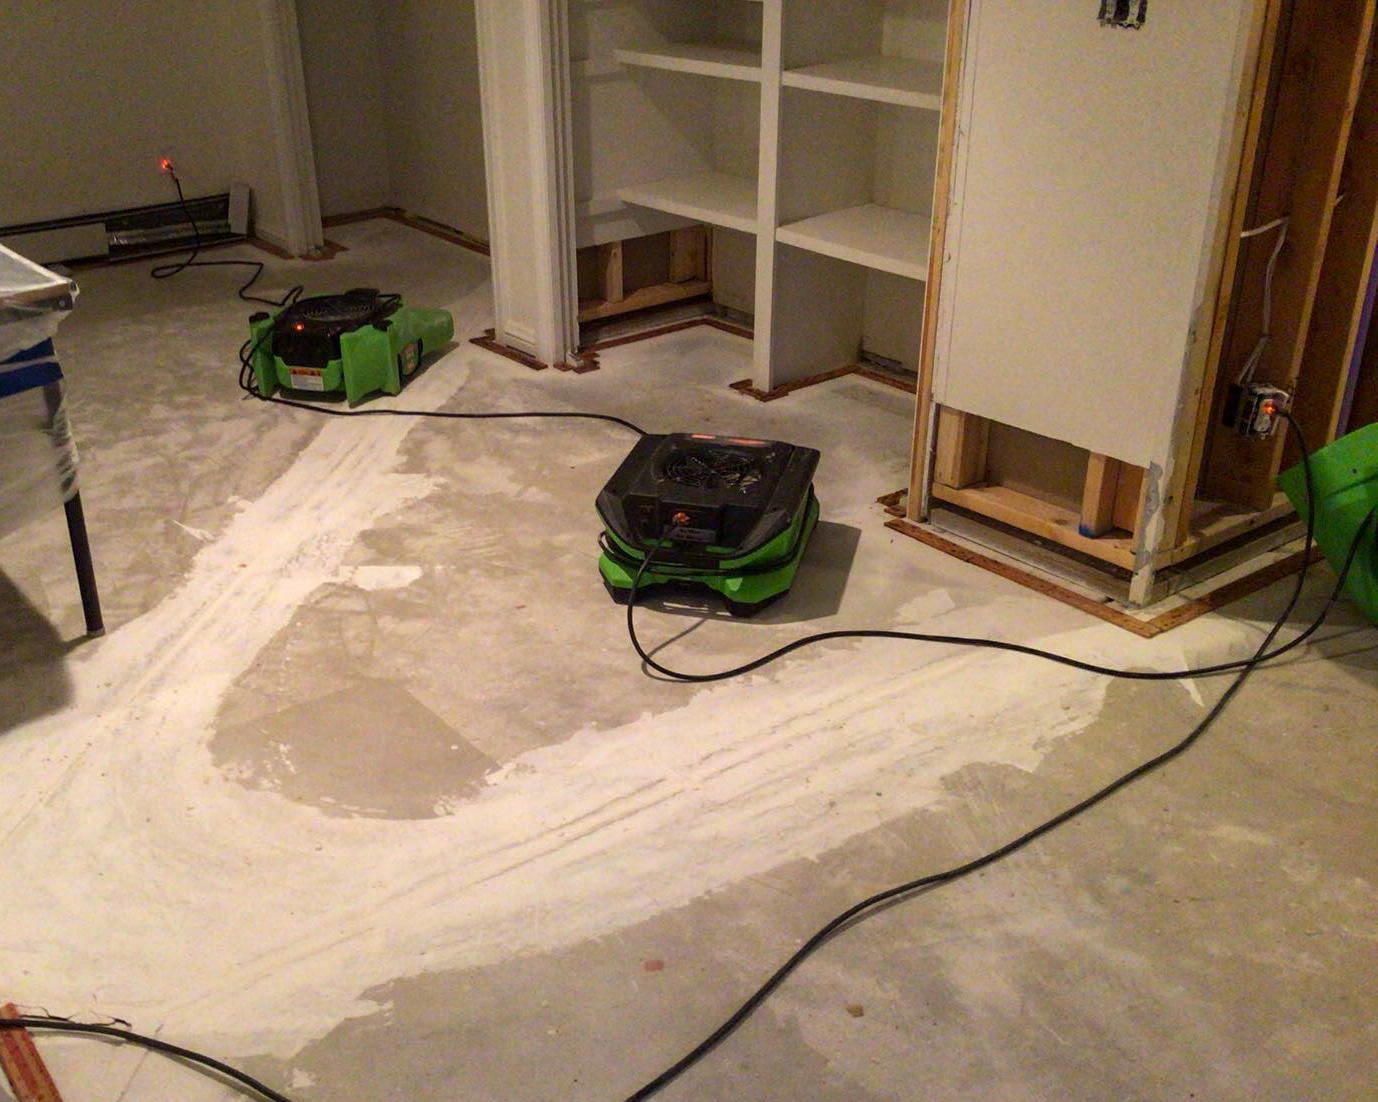 There is no loss that our SERVPRO of NorthWest Phoenix/ Anthem in New River, AZ can't handle, no matter how big or small! For fire, water, mold damage cleanup and restoration needs, contact the disaster restoration experts today!